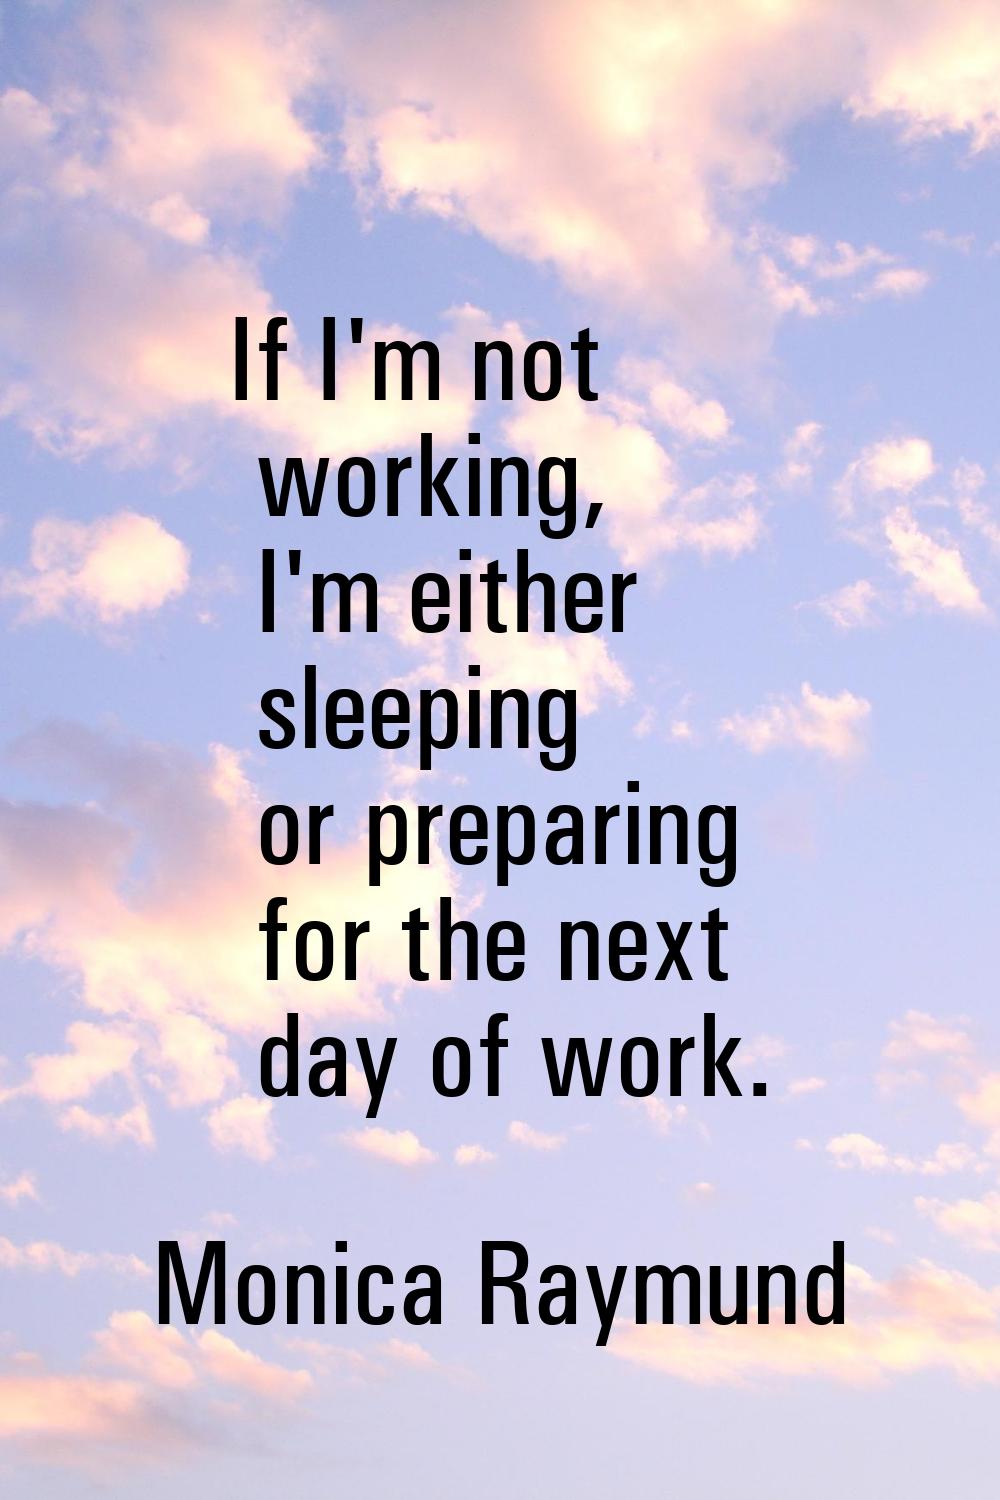 If I'm not working, I'm either sleeping or preparing for the next day of work.